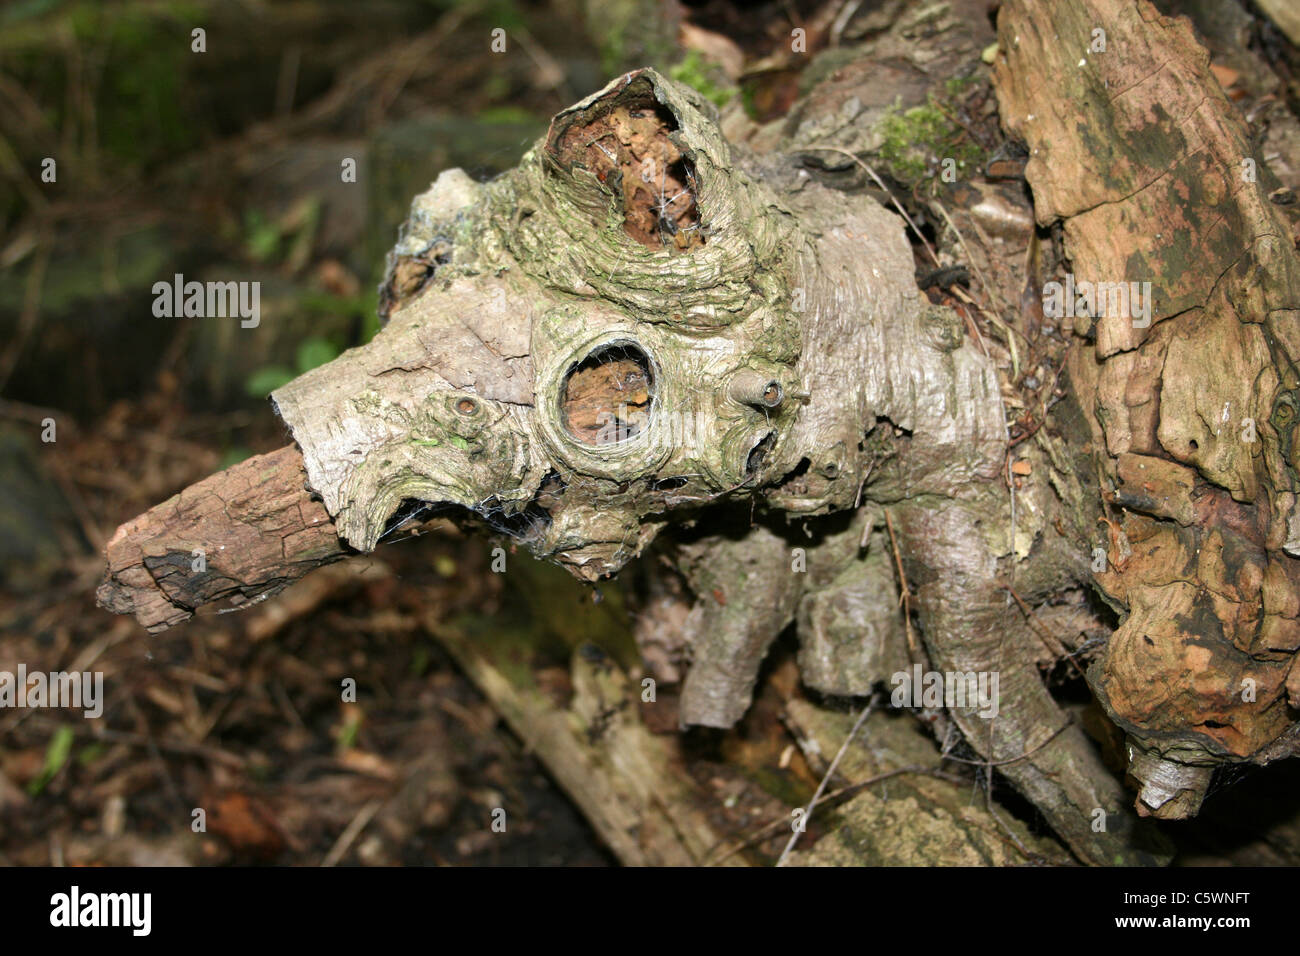 Gnarled Old Wood In The Shape of an Anteater Stock Photo